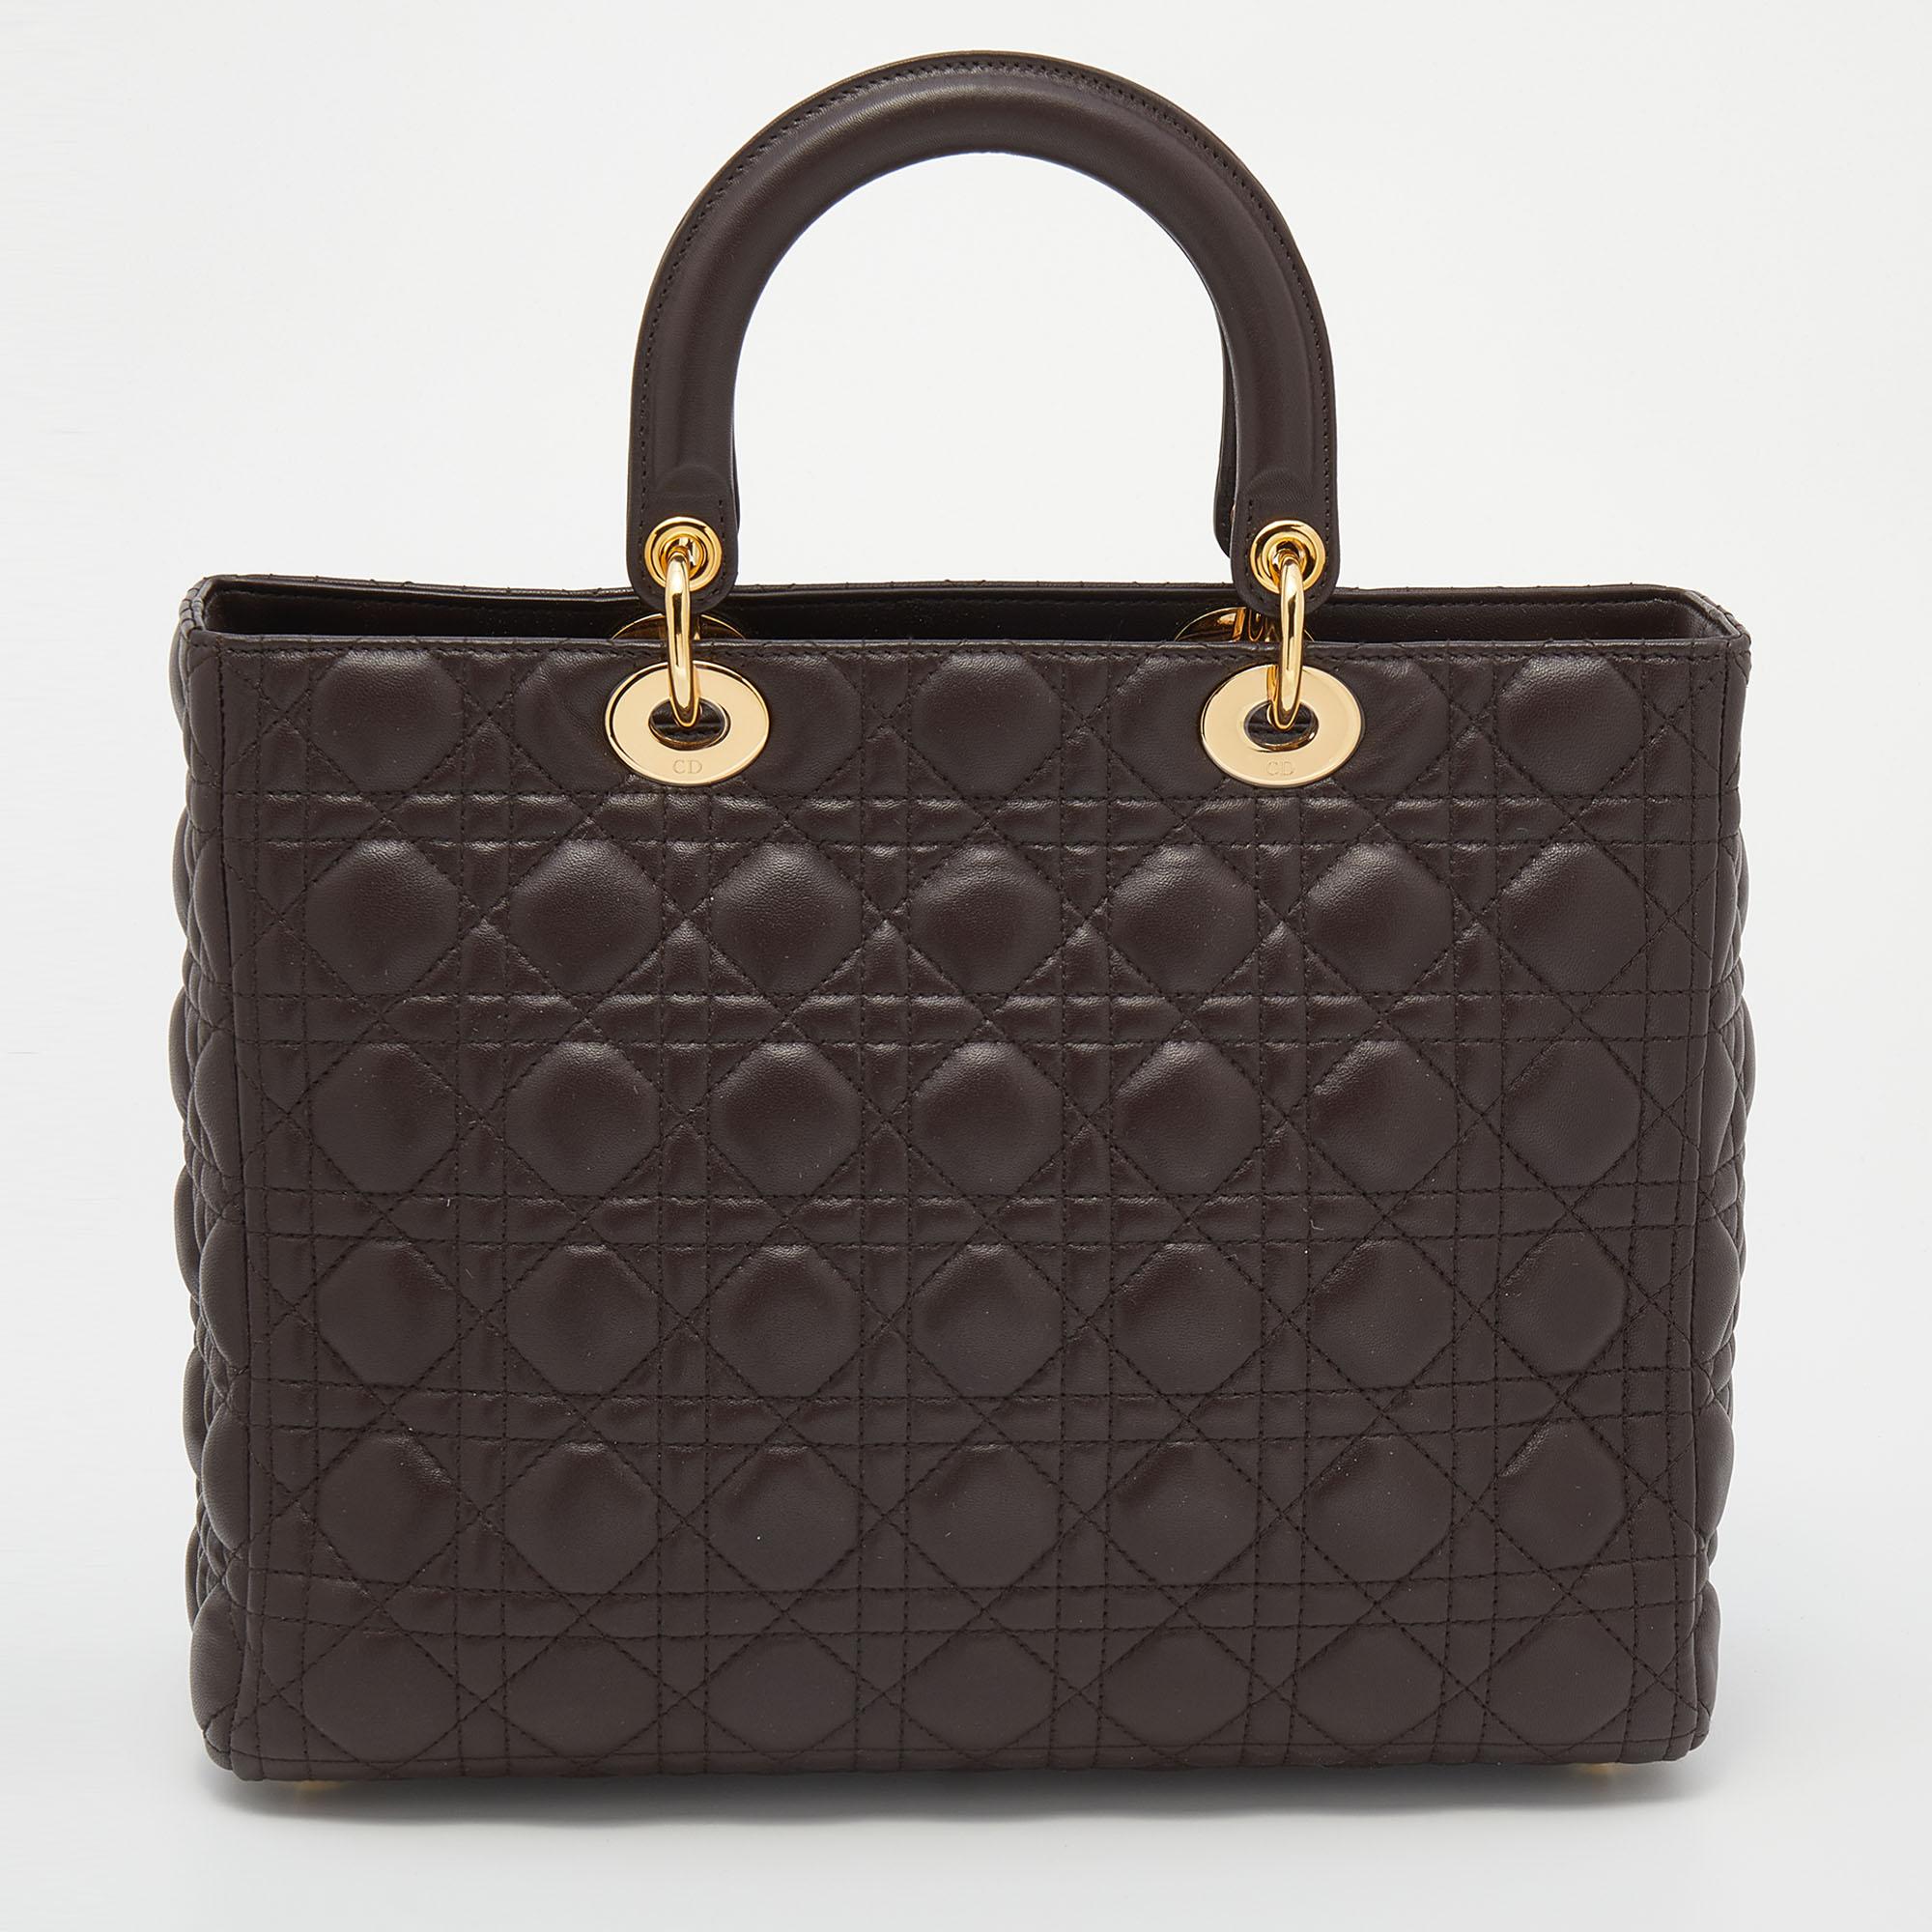 The Lady Dior tote is a Dior creation that has gained recognition worldwide and is today a coveted bag that every fashionista craves to possess. This dark brown tote has been crafted from leather and it carries the signature Cannage quilt. It is